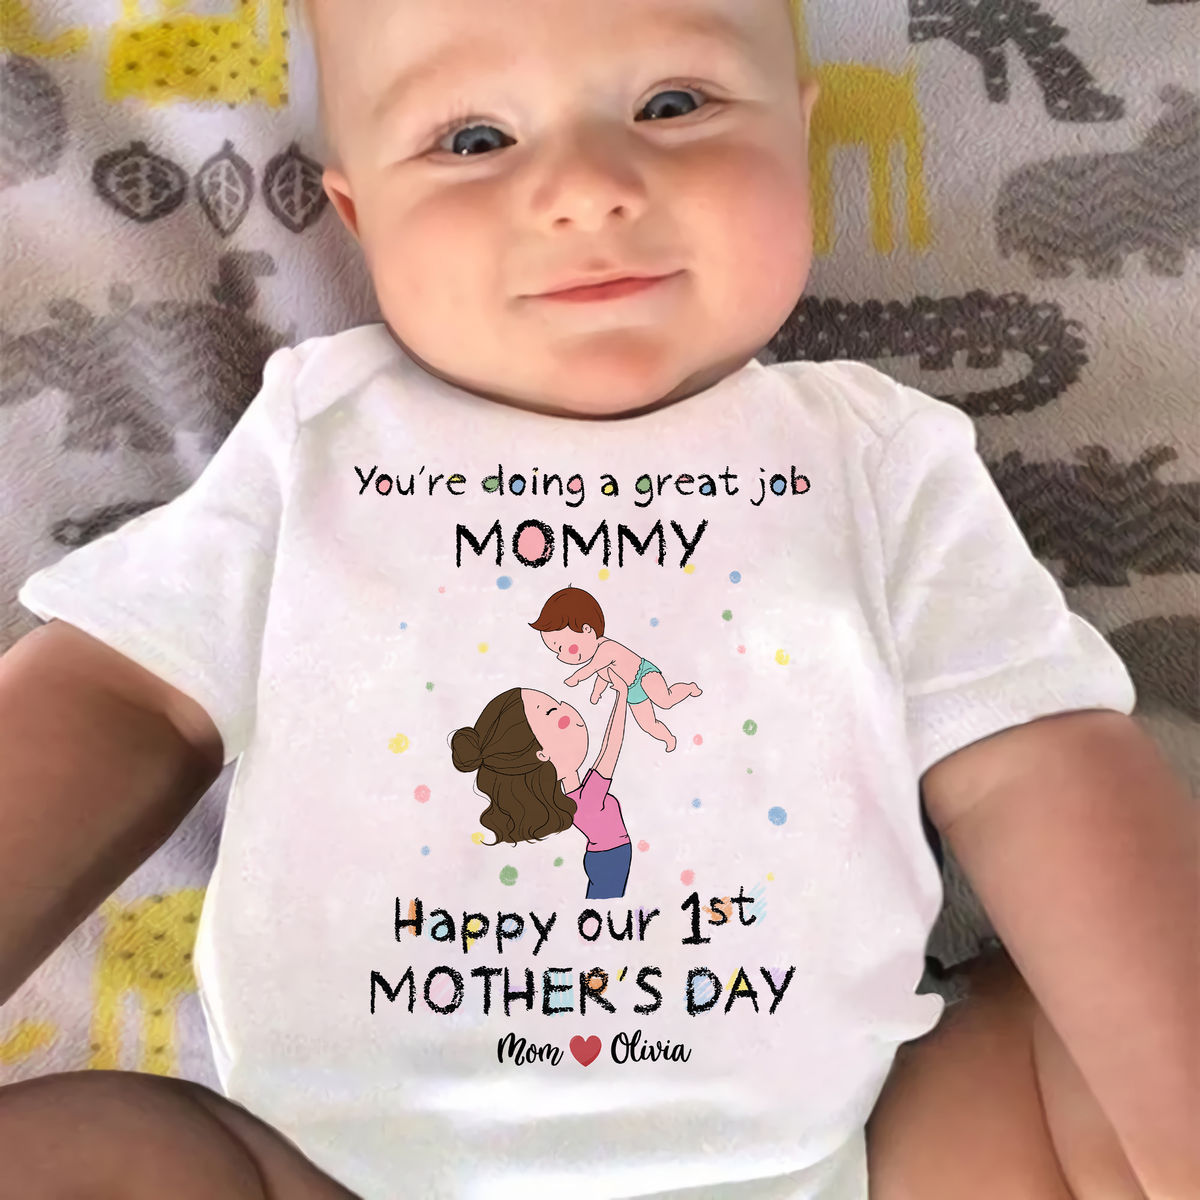 You're doing a great job Mommy - Happy our 1st Mother's Day (27868)